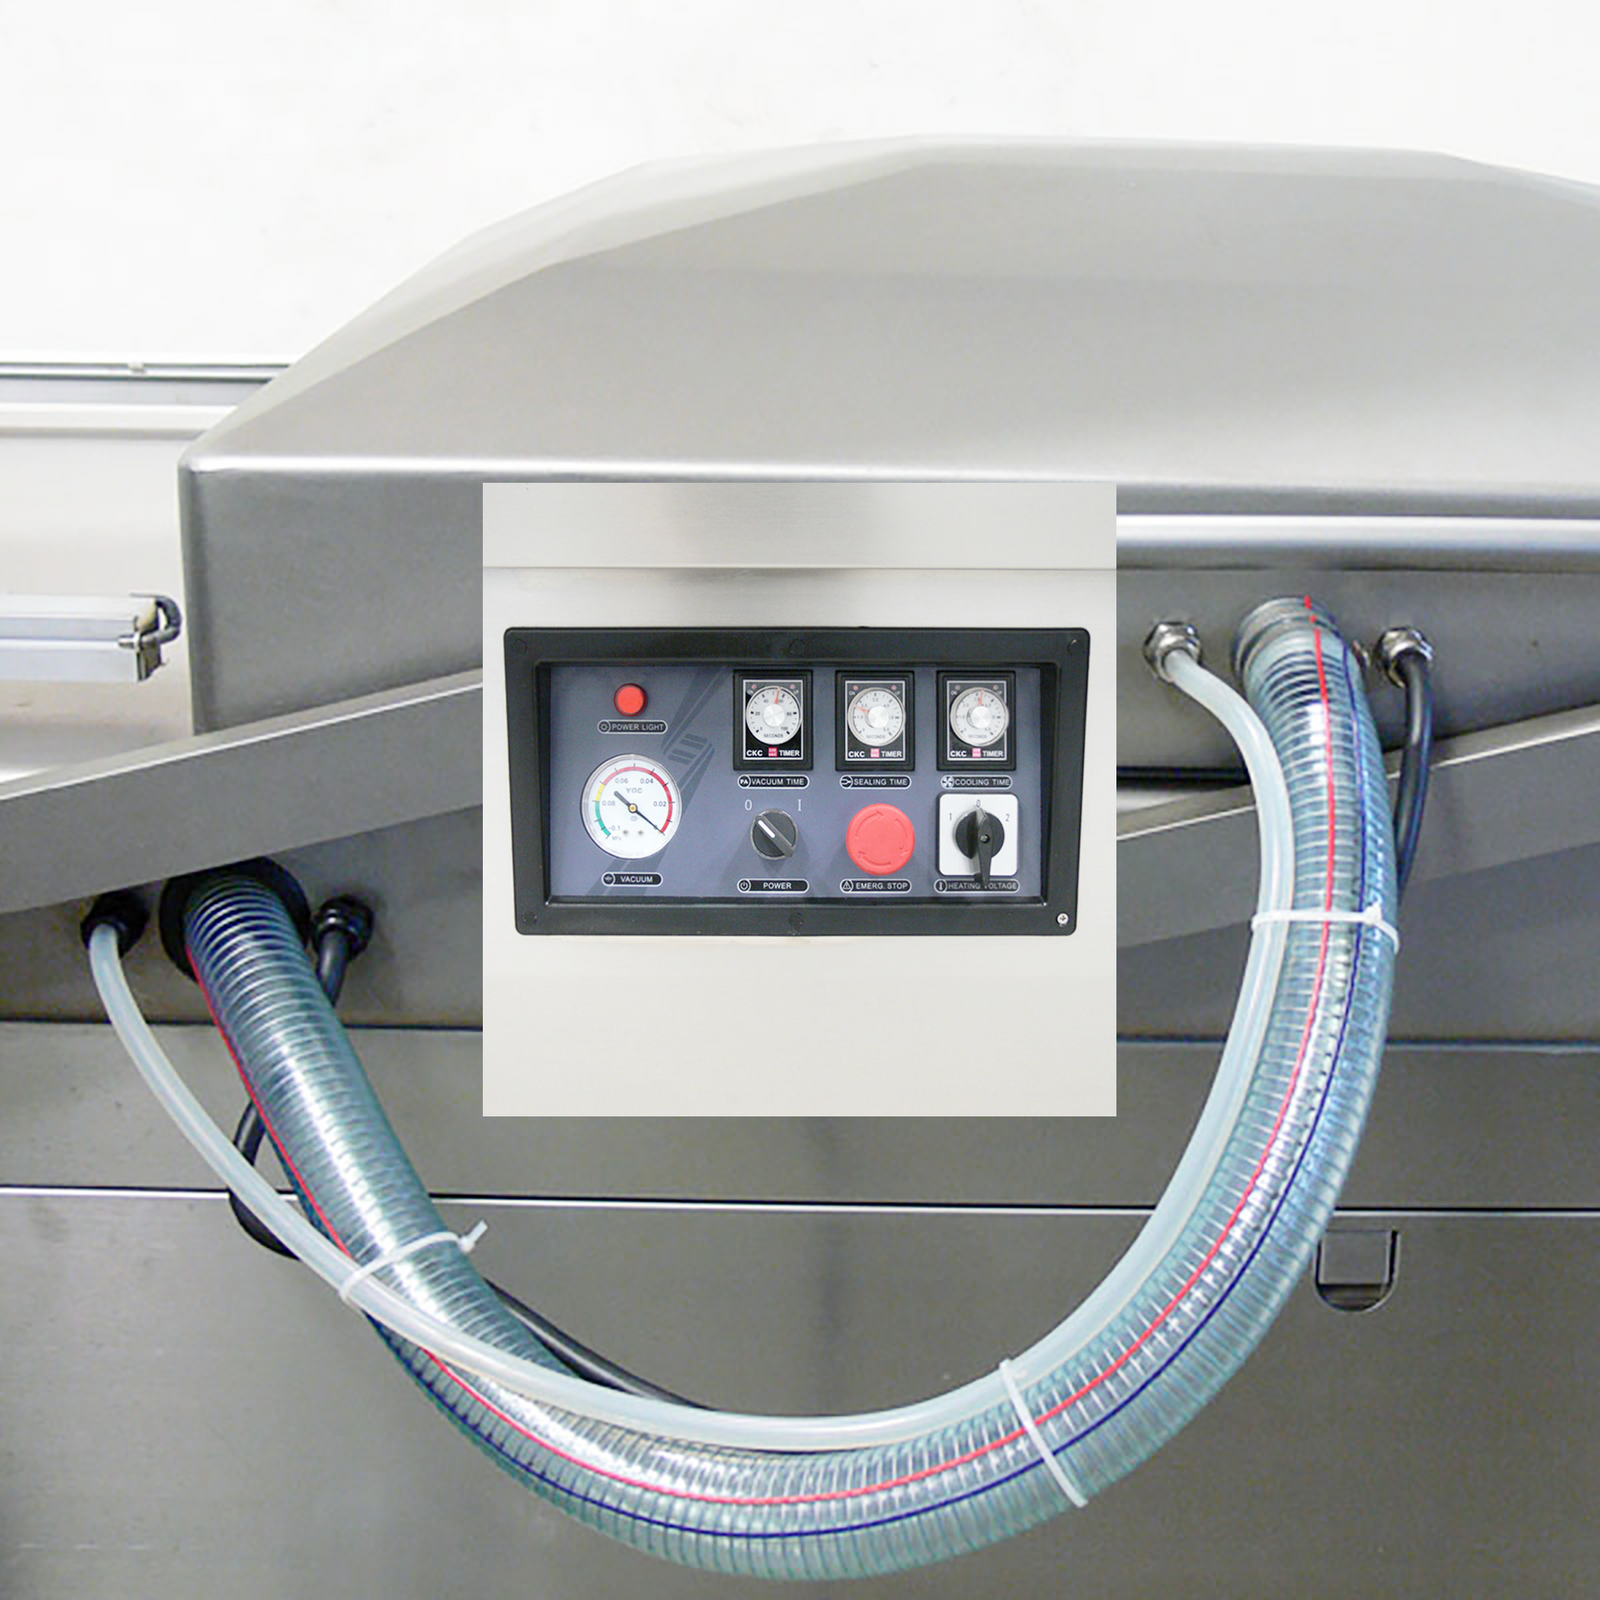 Control panel on the JORES TECHNOLOGIES® 2 chamber vacuum sealer